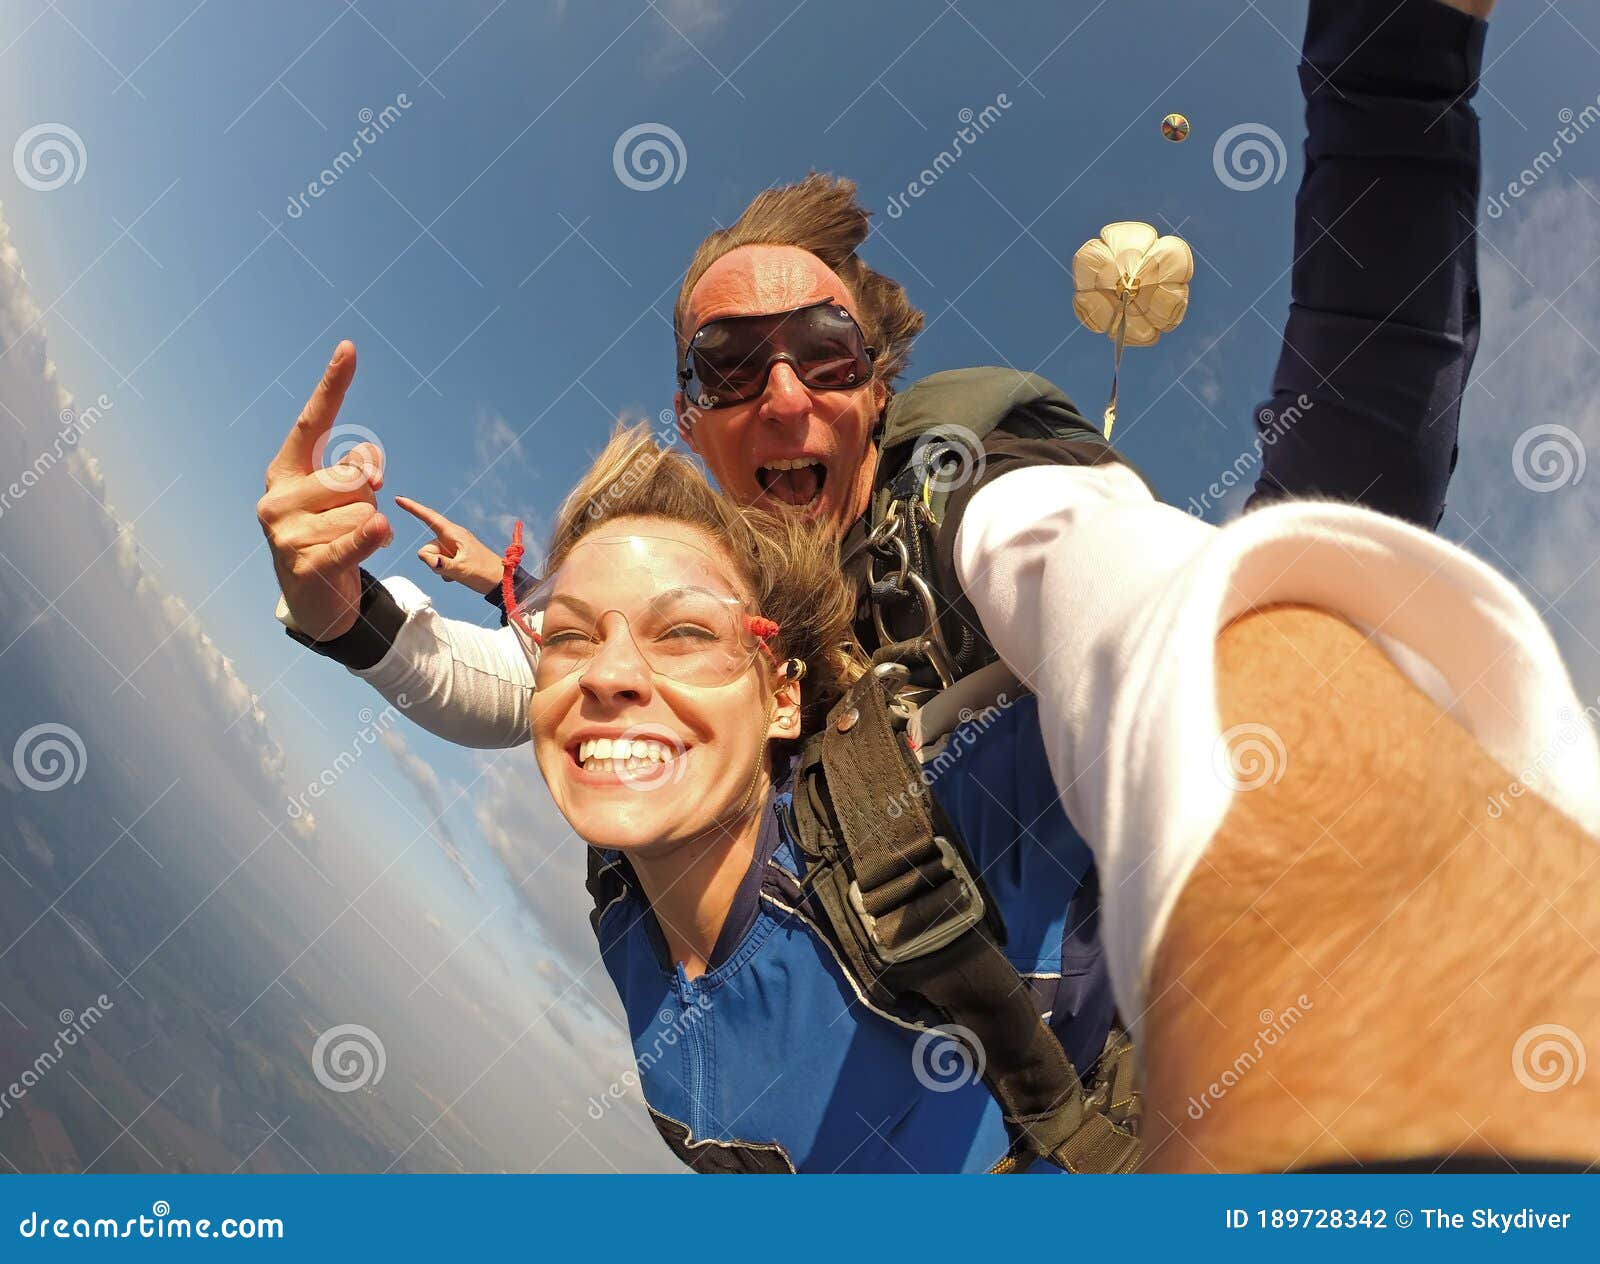 selfie tandem skydiving with pretty woman